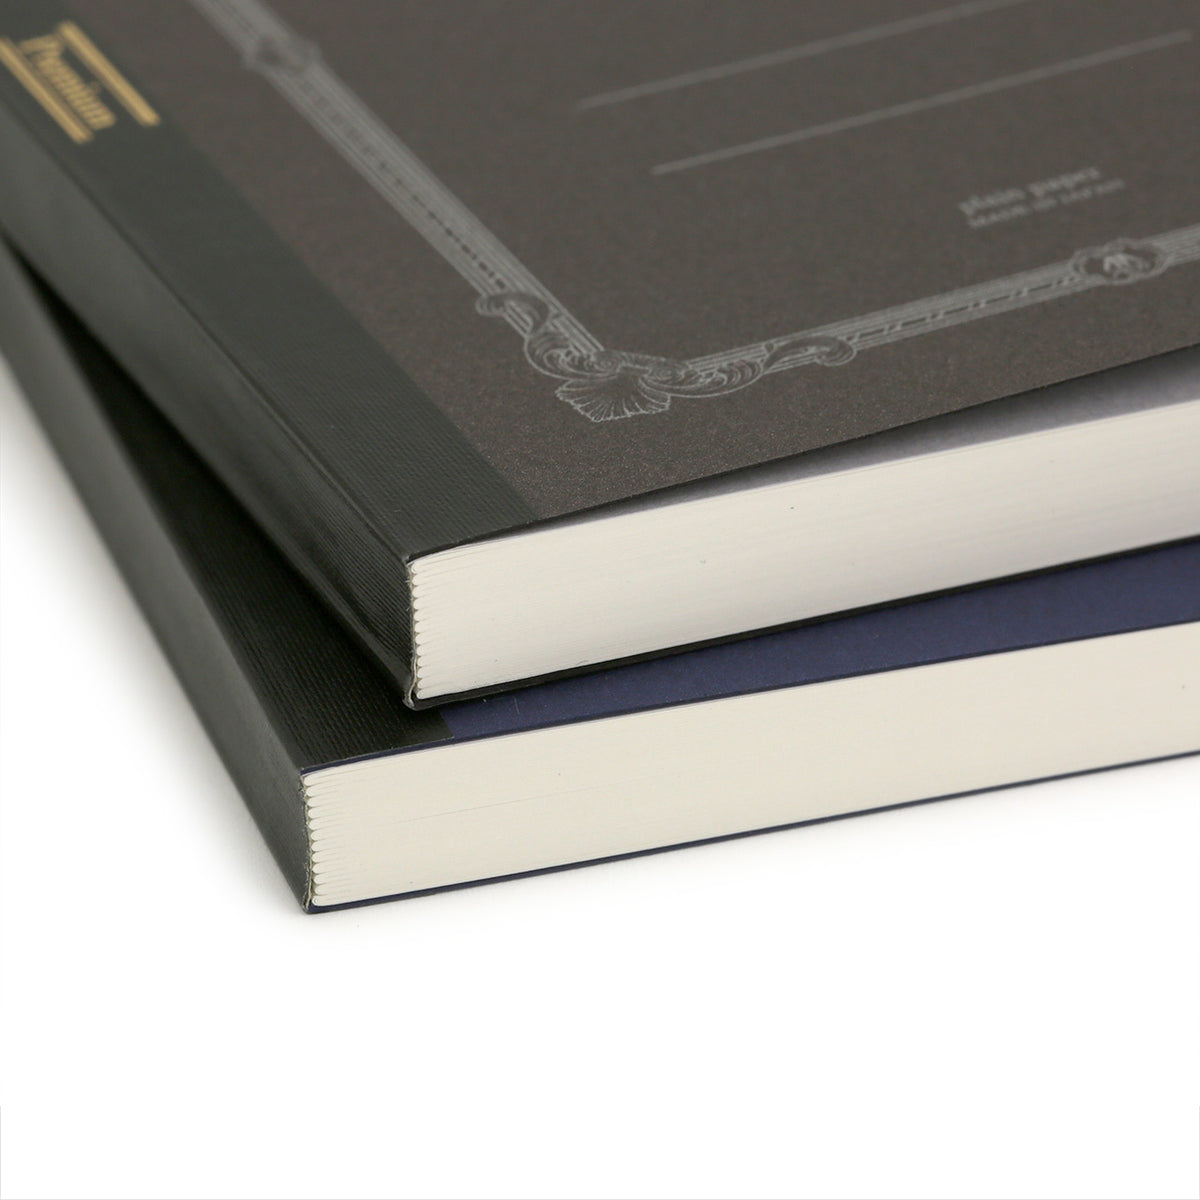 End view of spines for APICA CD premium notebooks showing the stitched sections and fabric taped spine